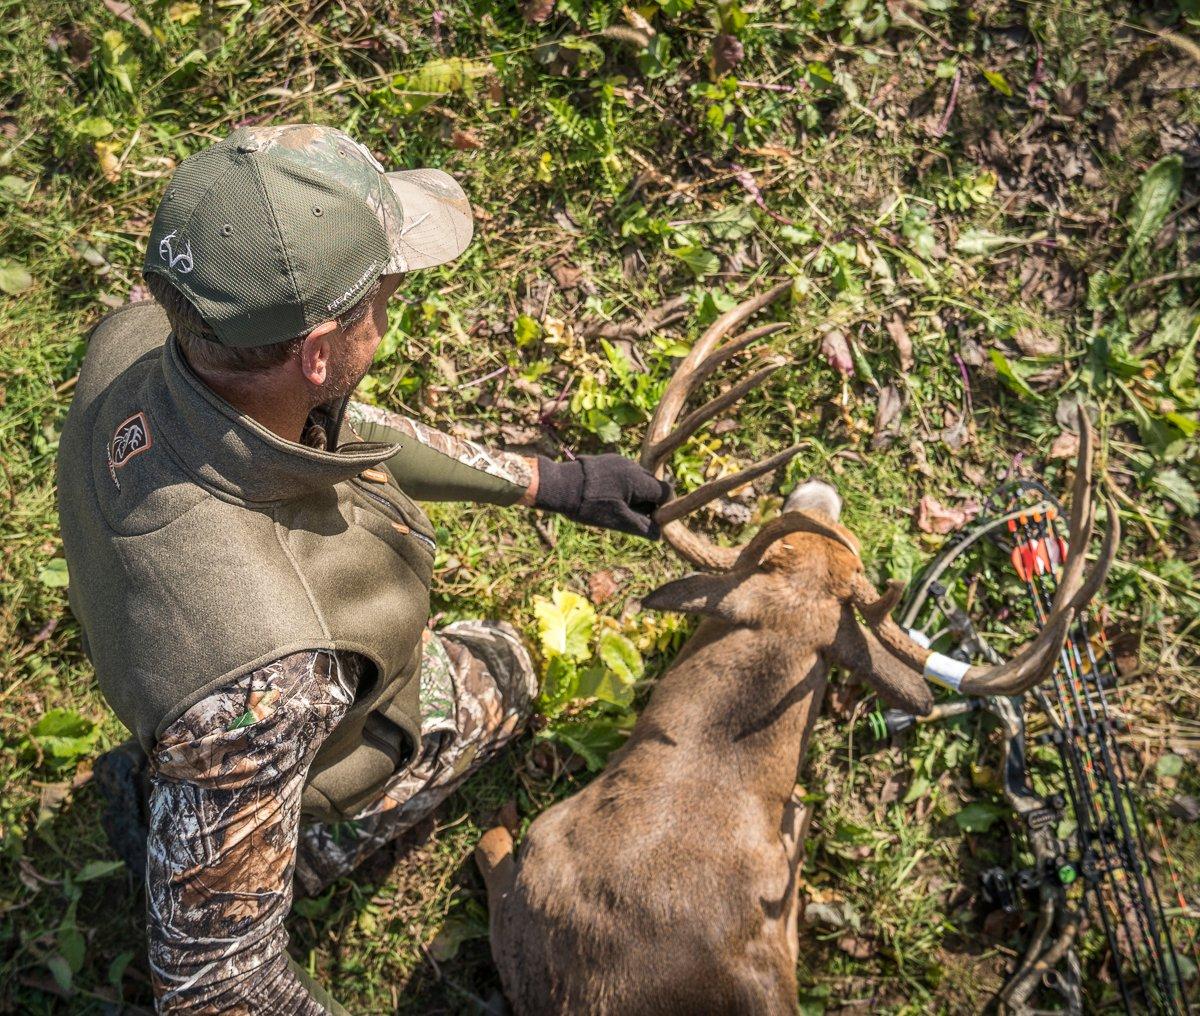 It's possible to enjoy deer hunting even in areas where trophy management isn't probable. (Midwest Whitetail photo)